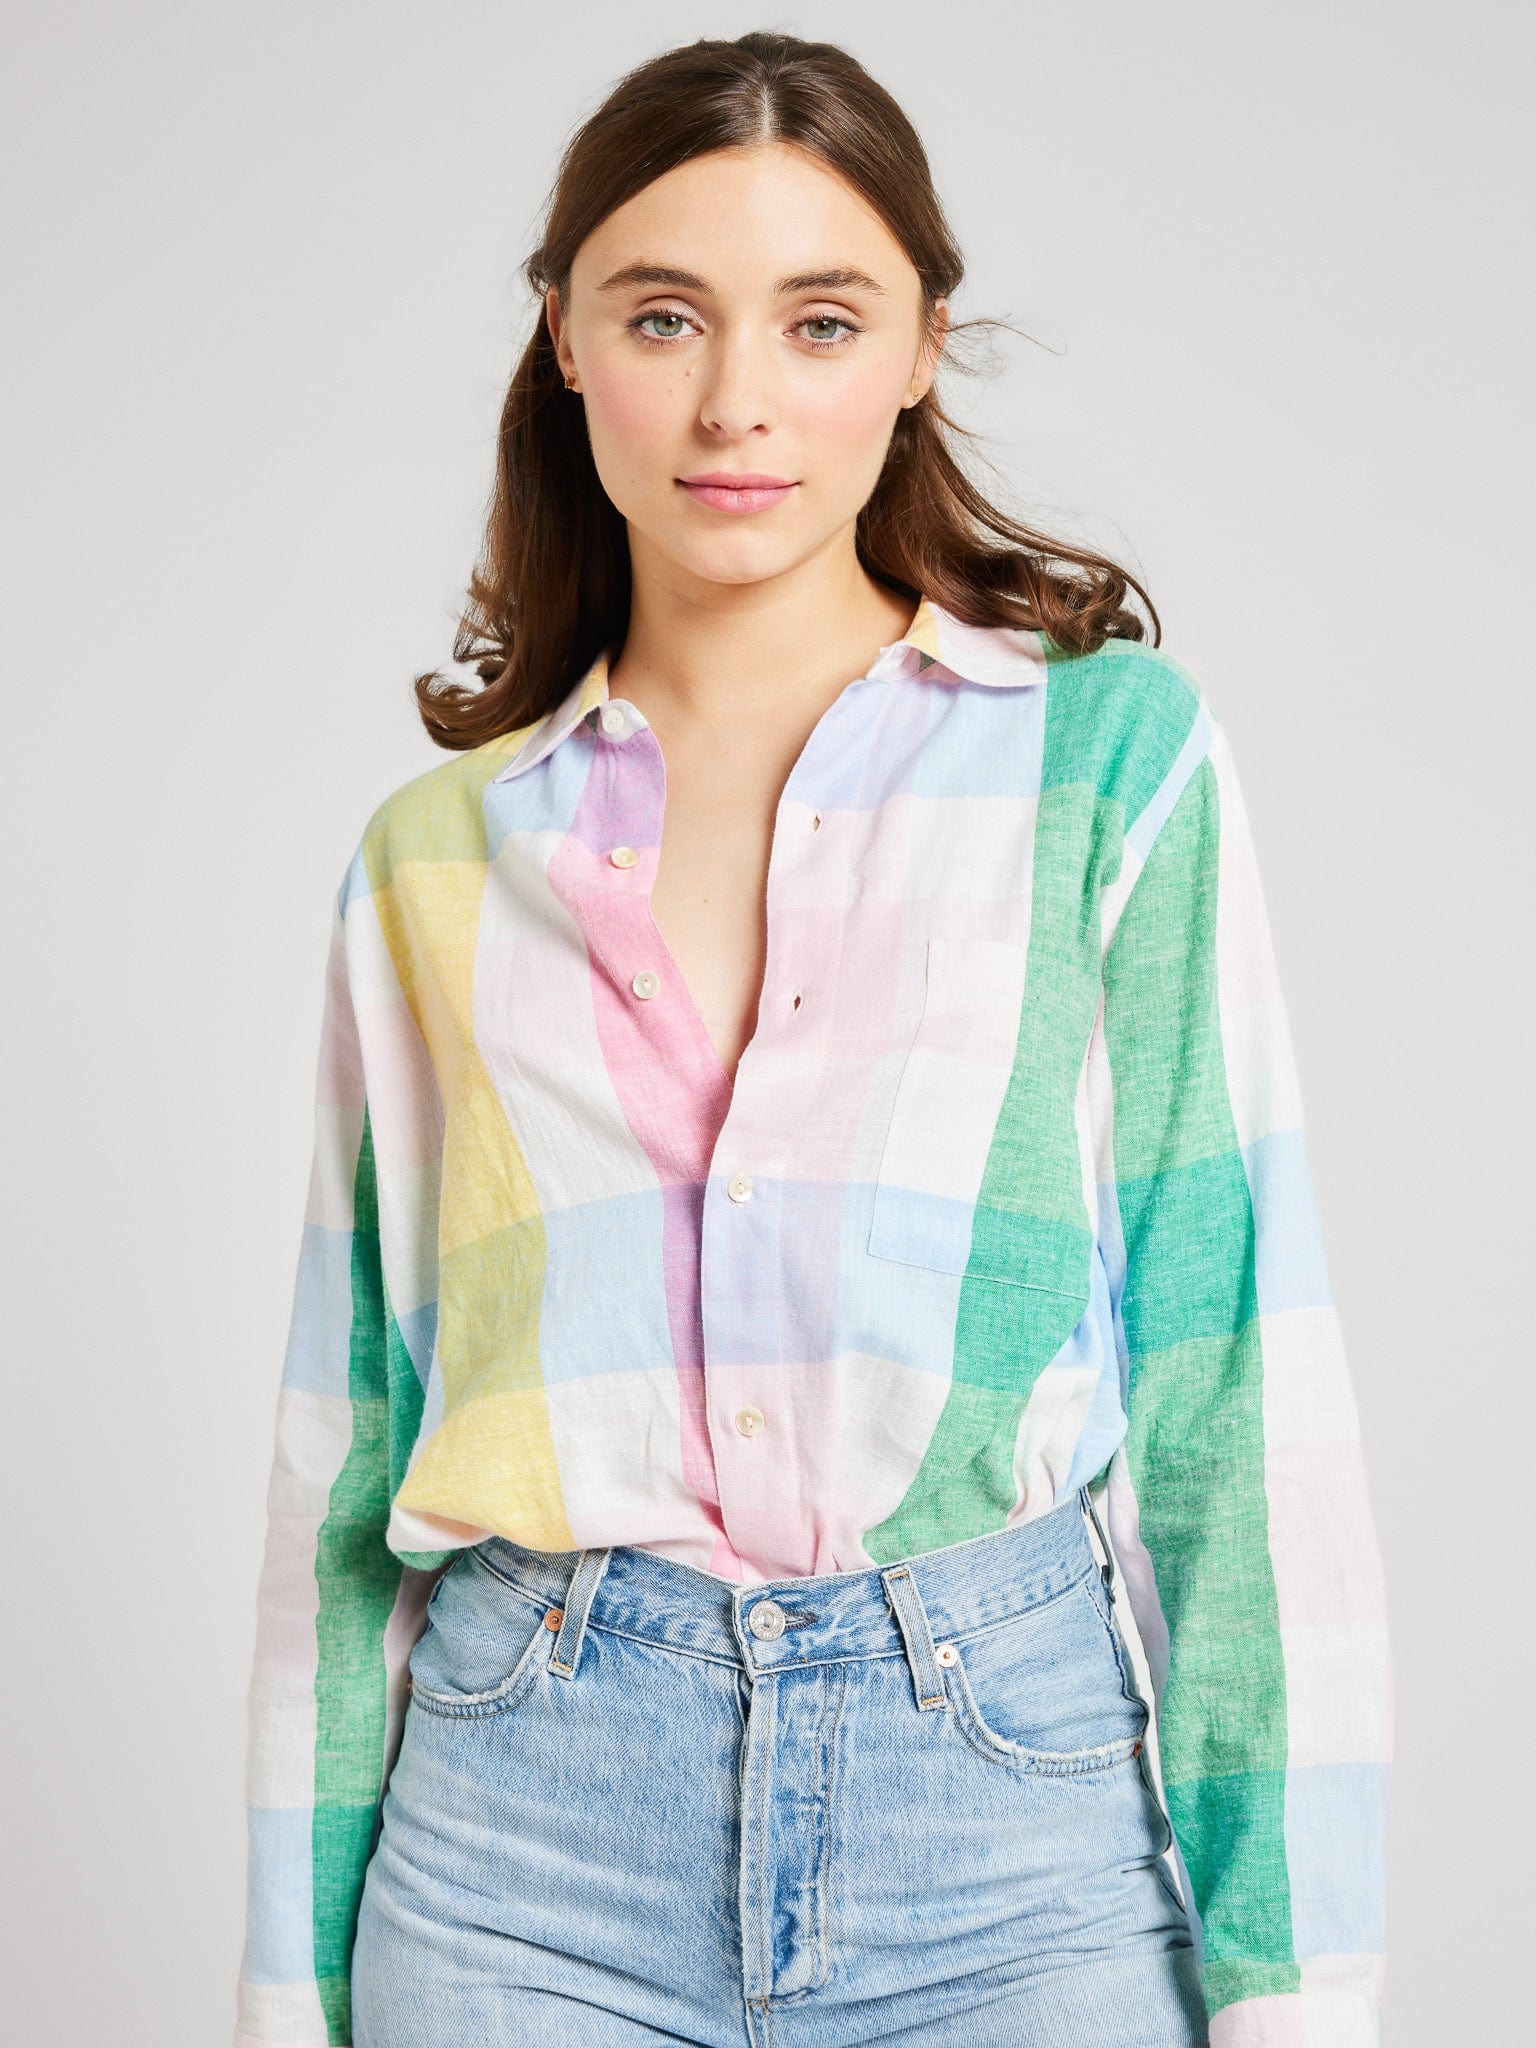 MILLE Clothing Sofia Top in Pastel Plaid